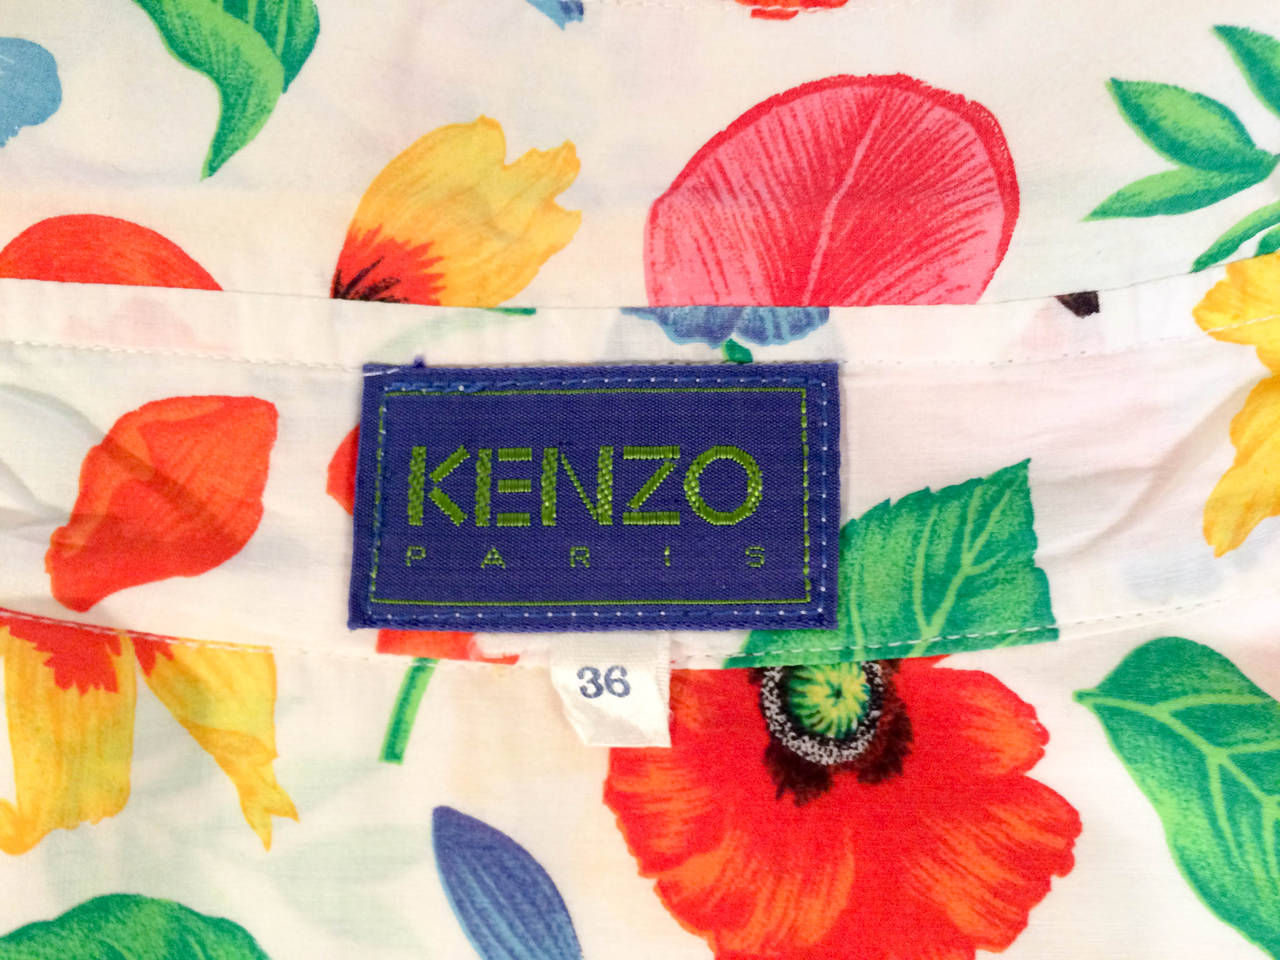 Kenzo Floral Shirt Dress - 1970s / 1980s For Sale 3